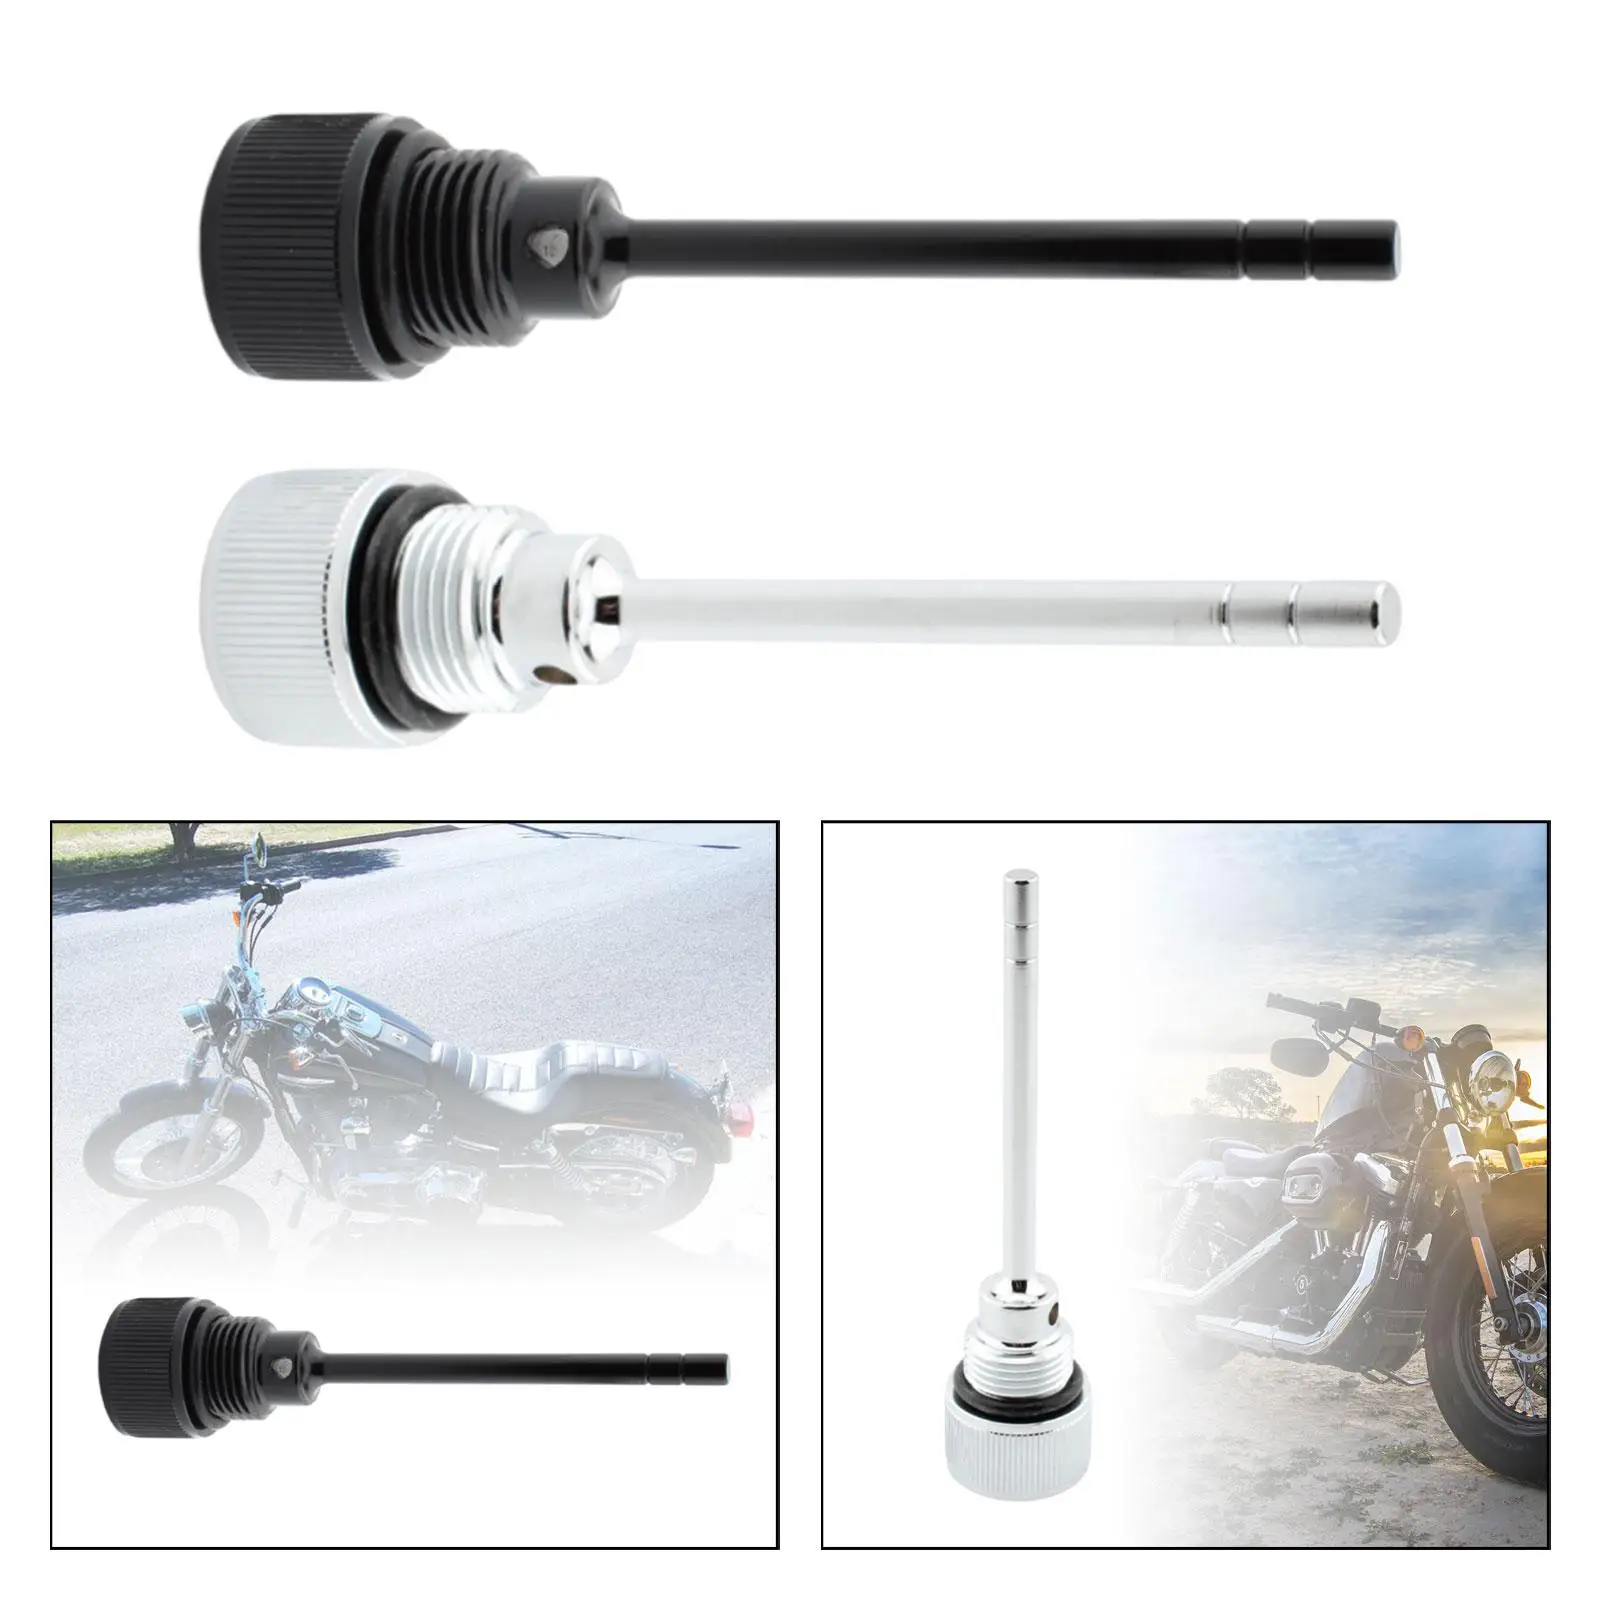 Transmission Dipstick Replaces for Fxs Deluxe Flde Classic Efi Flhtci